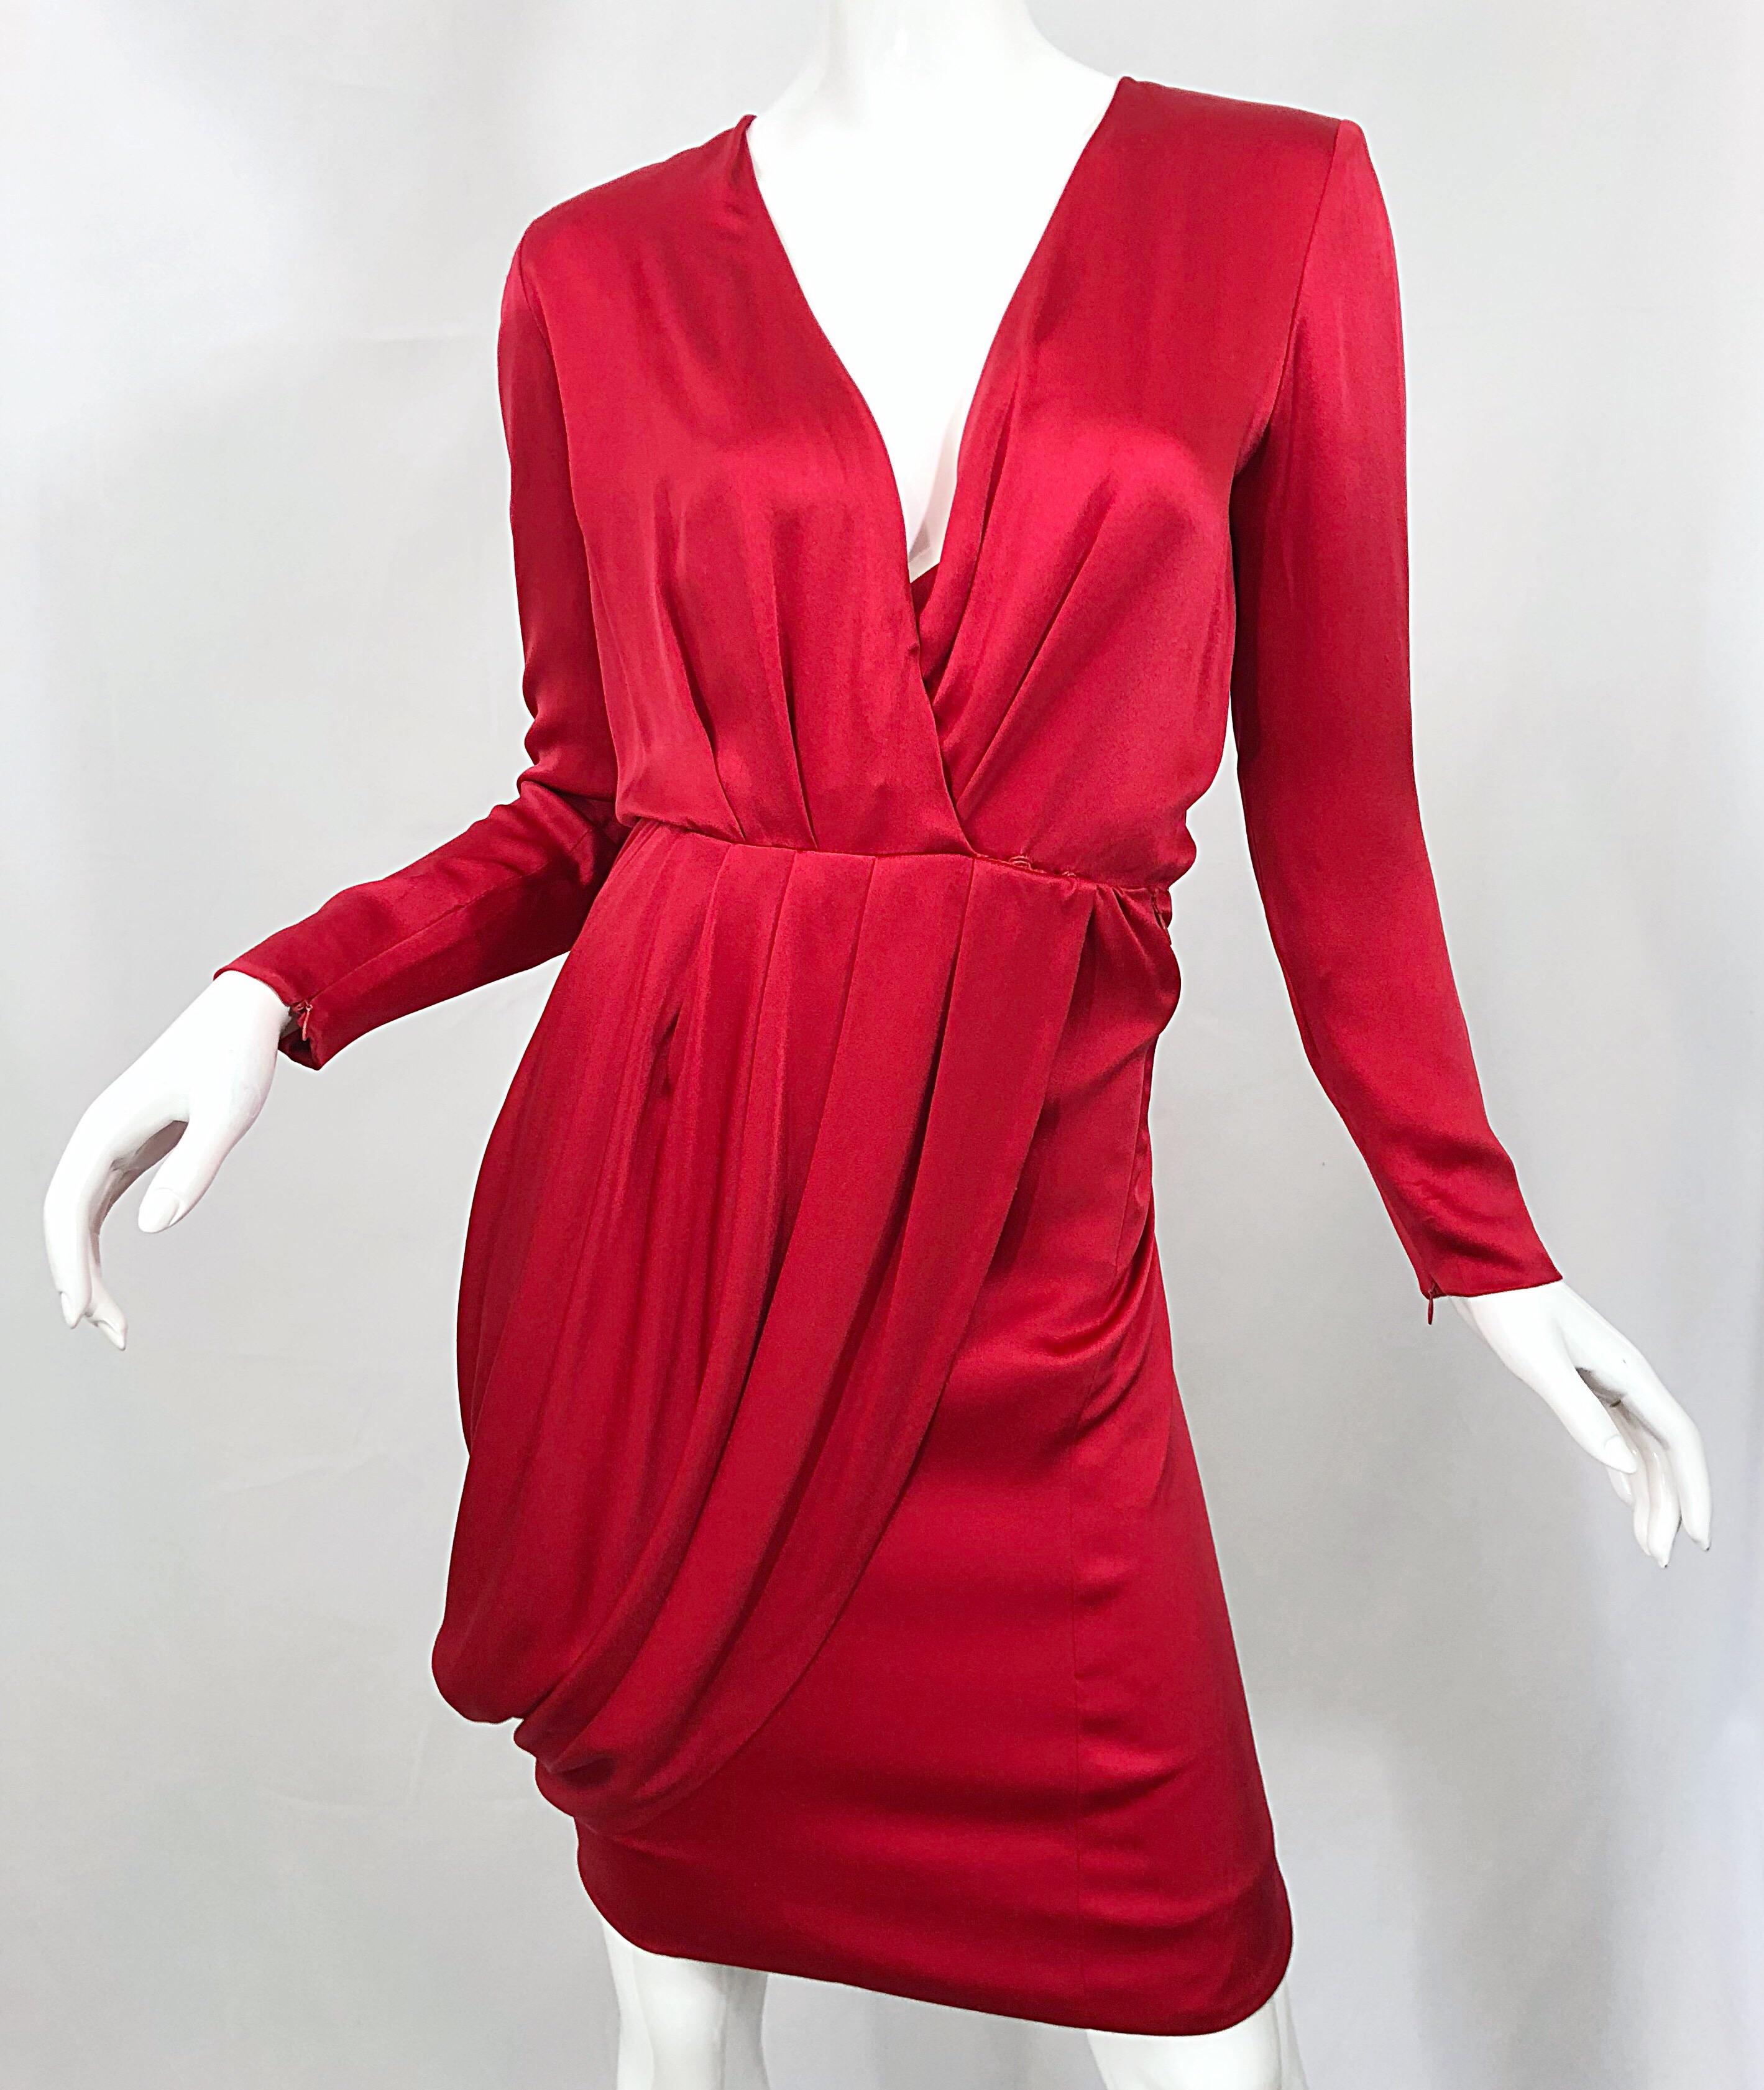 Women's Vintage Givenchy Couture by Alexander McQueen Sz 36 Lipstick Red Silk Cape Dress For Sale